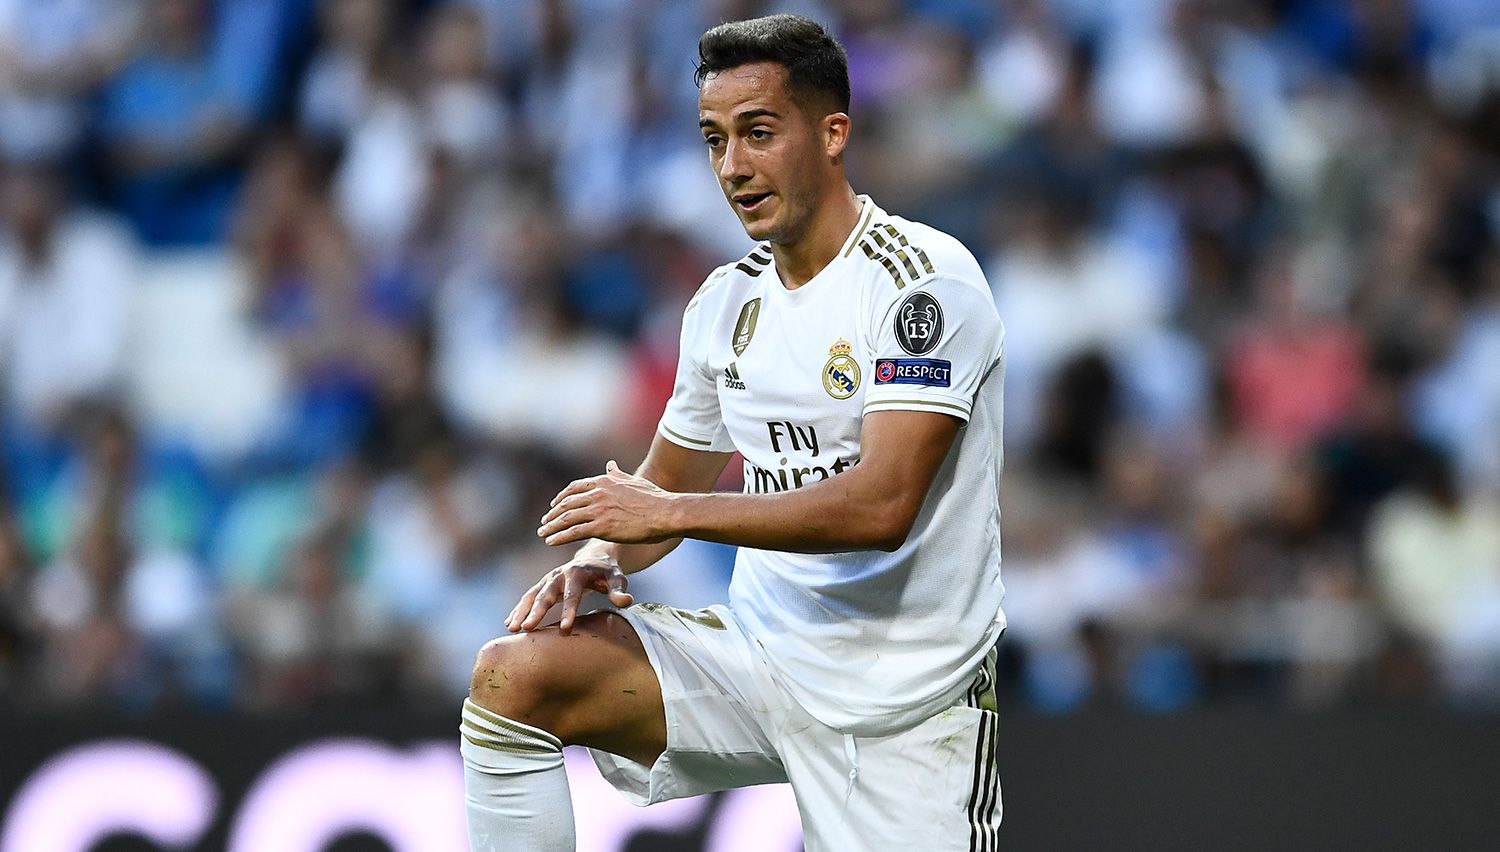 Lucas Vázquez during the party against the Witches